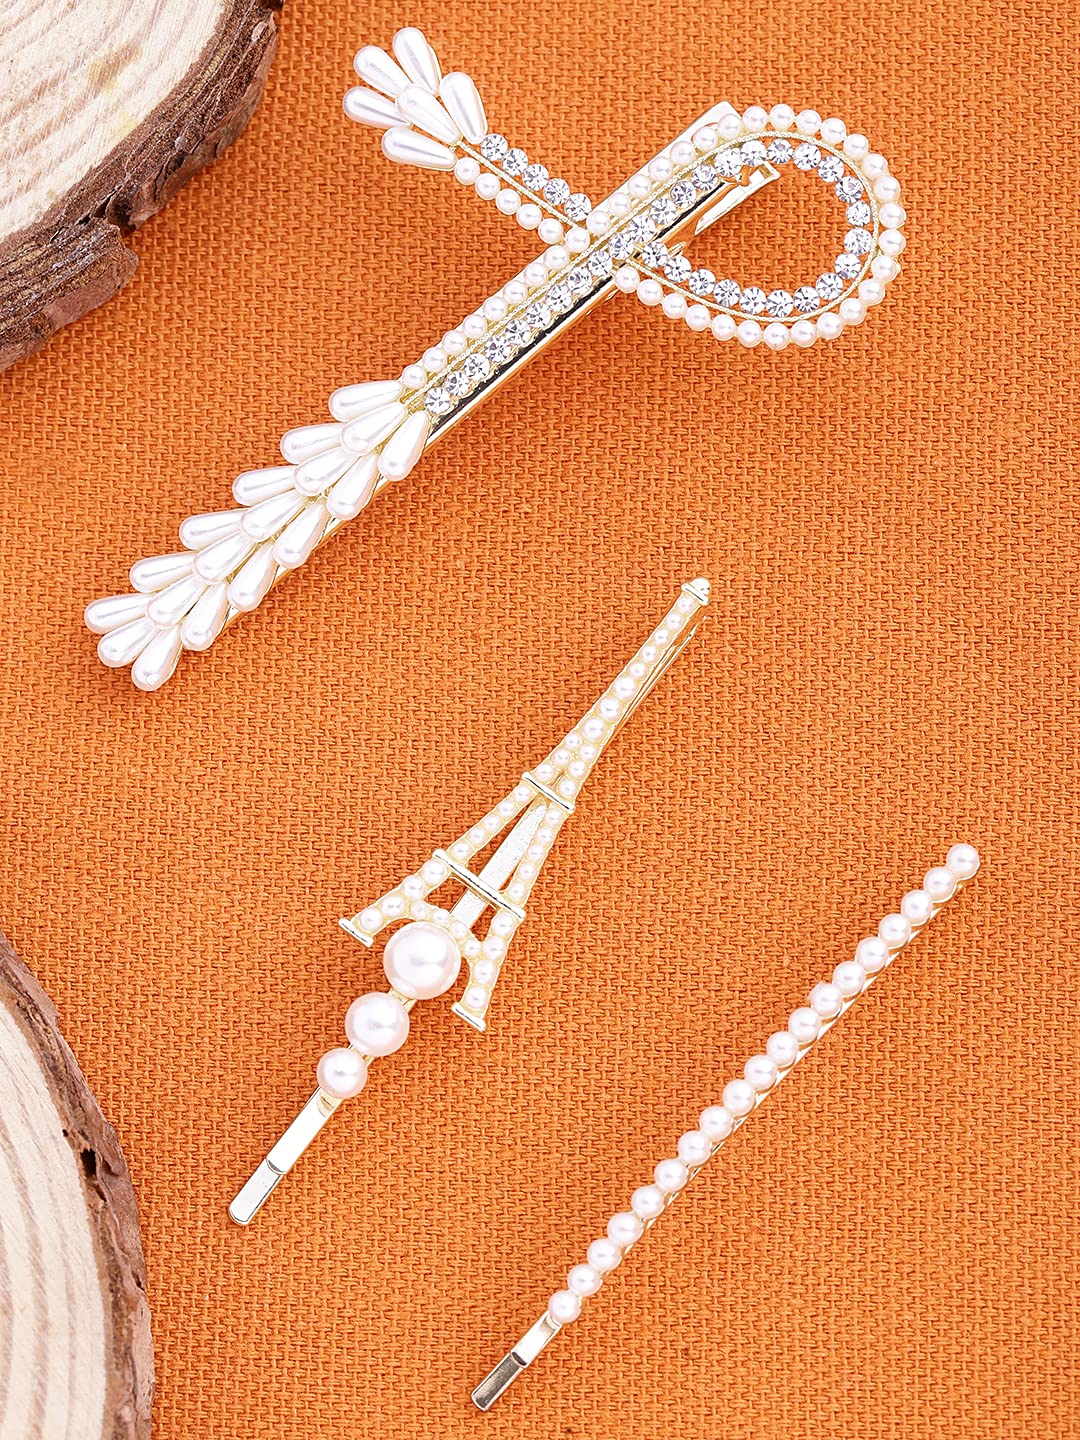 Yellow Chimes 3 pcs Iffil Tower Design Pearl Metal Hair Clip Allegator Pin Hair Accessories Boddy Pin Accessories for Women Girls, White, Medium